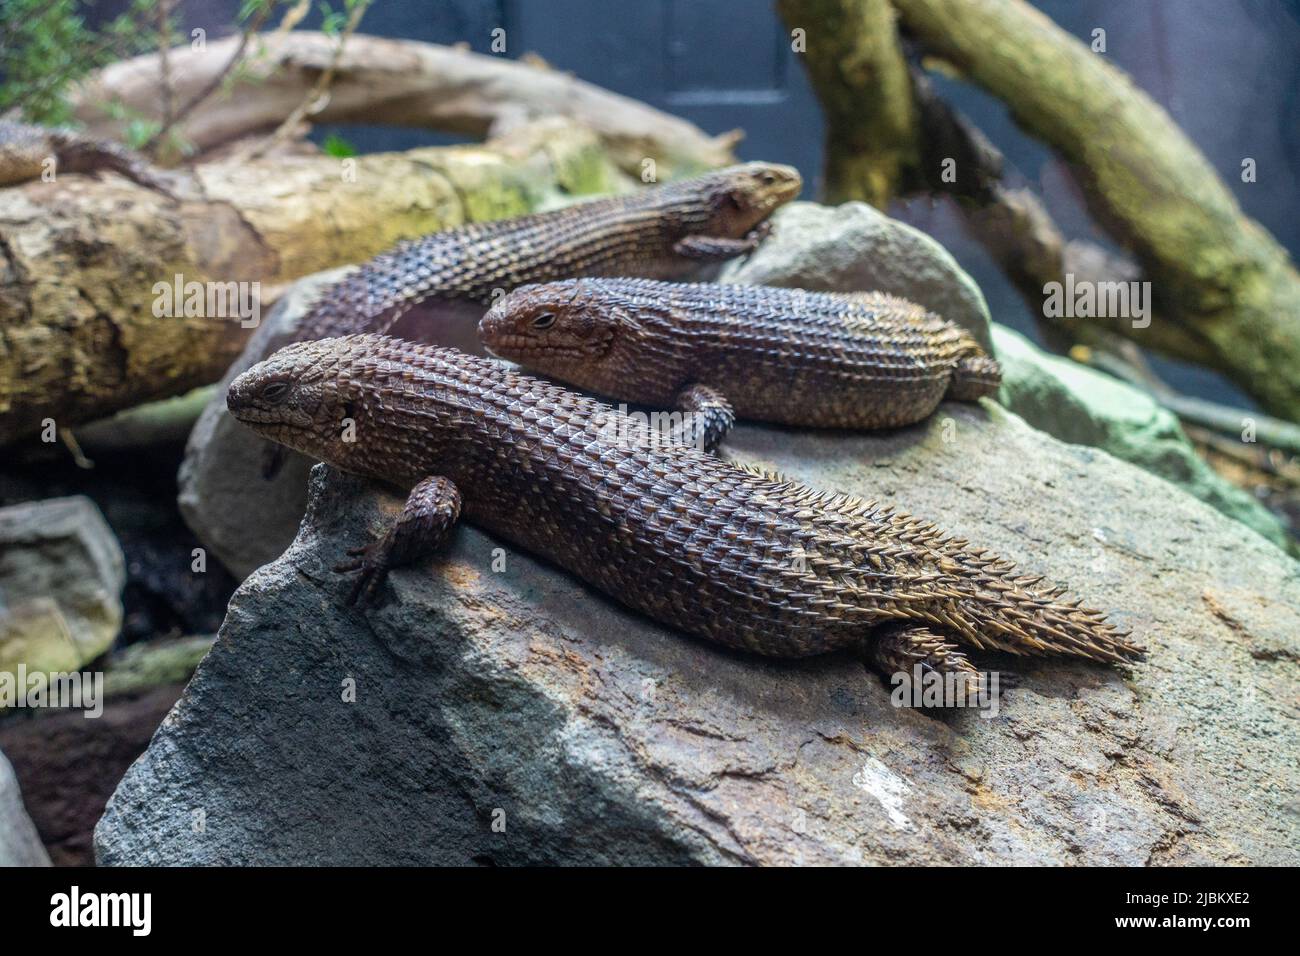 A group of Gidgy Spiny-Tailed Skinks on a rock in their enclosure at London Zoo Stock Photo